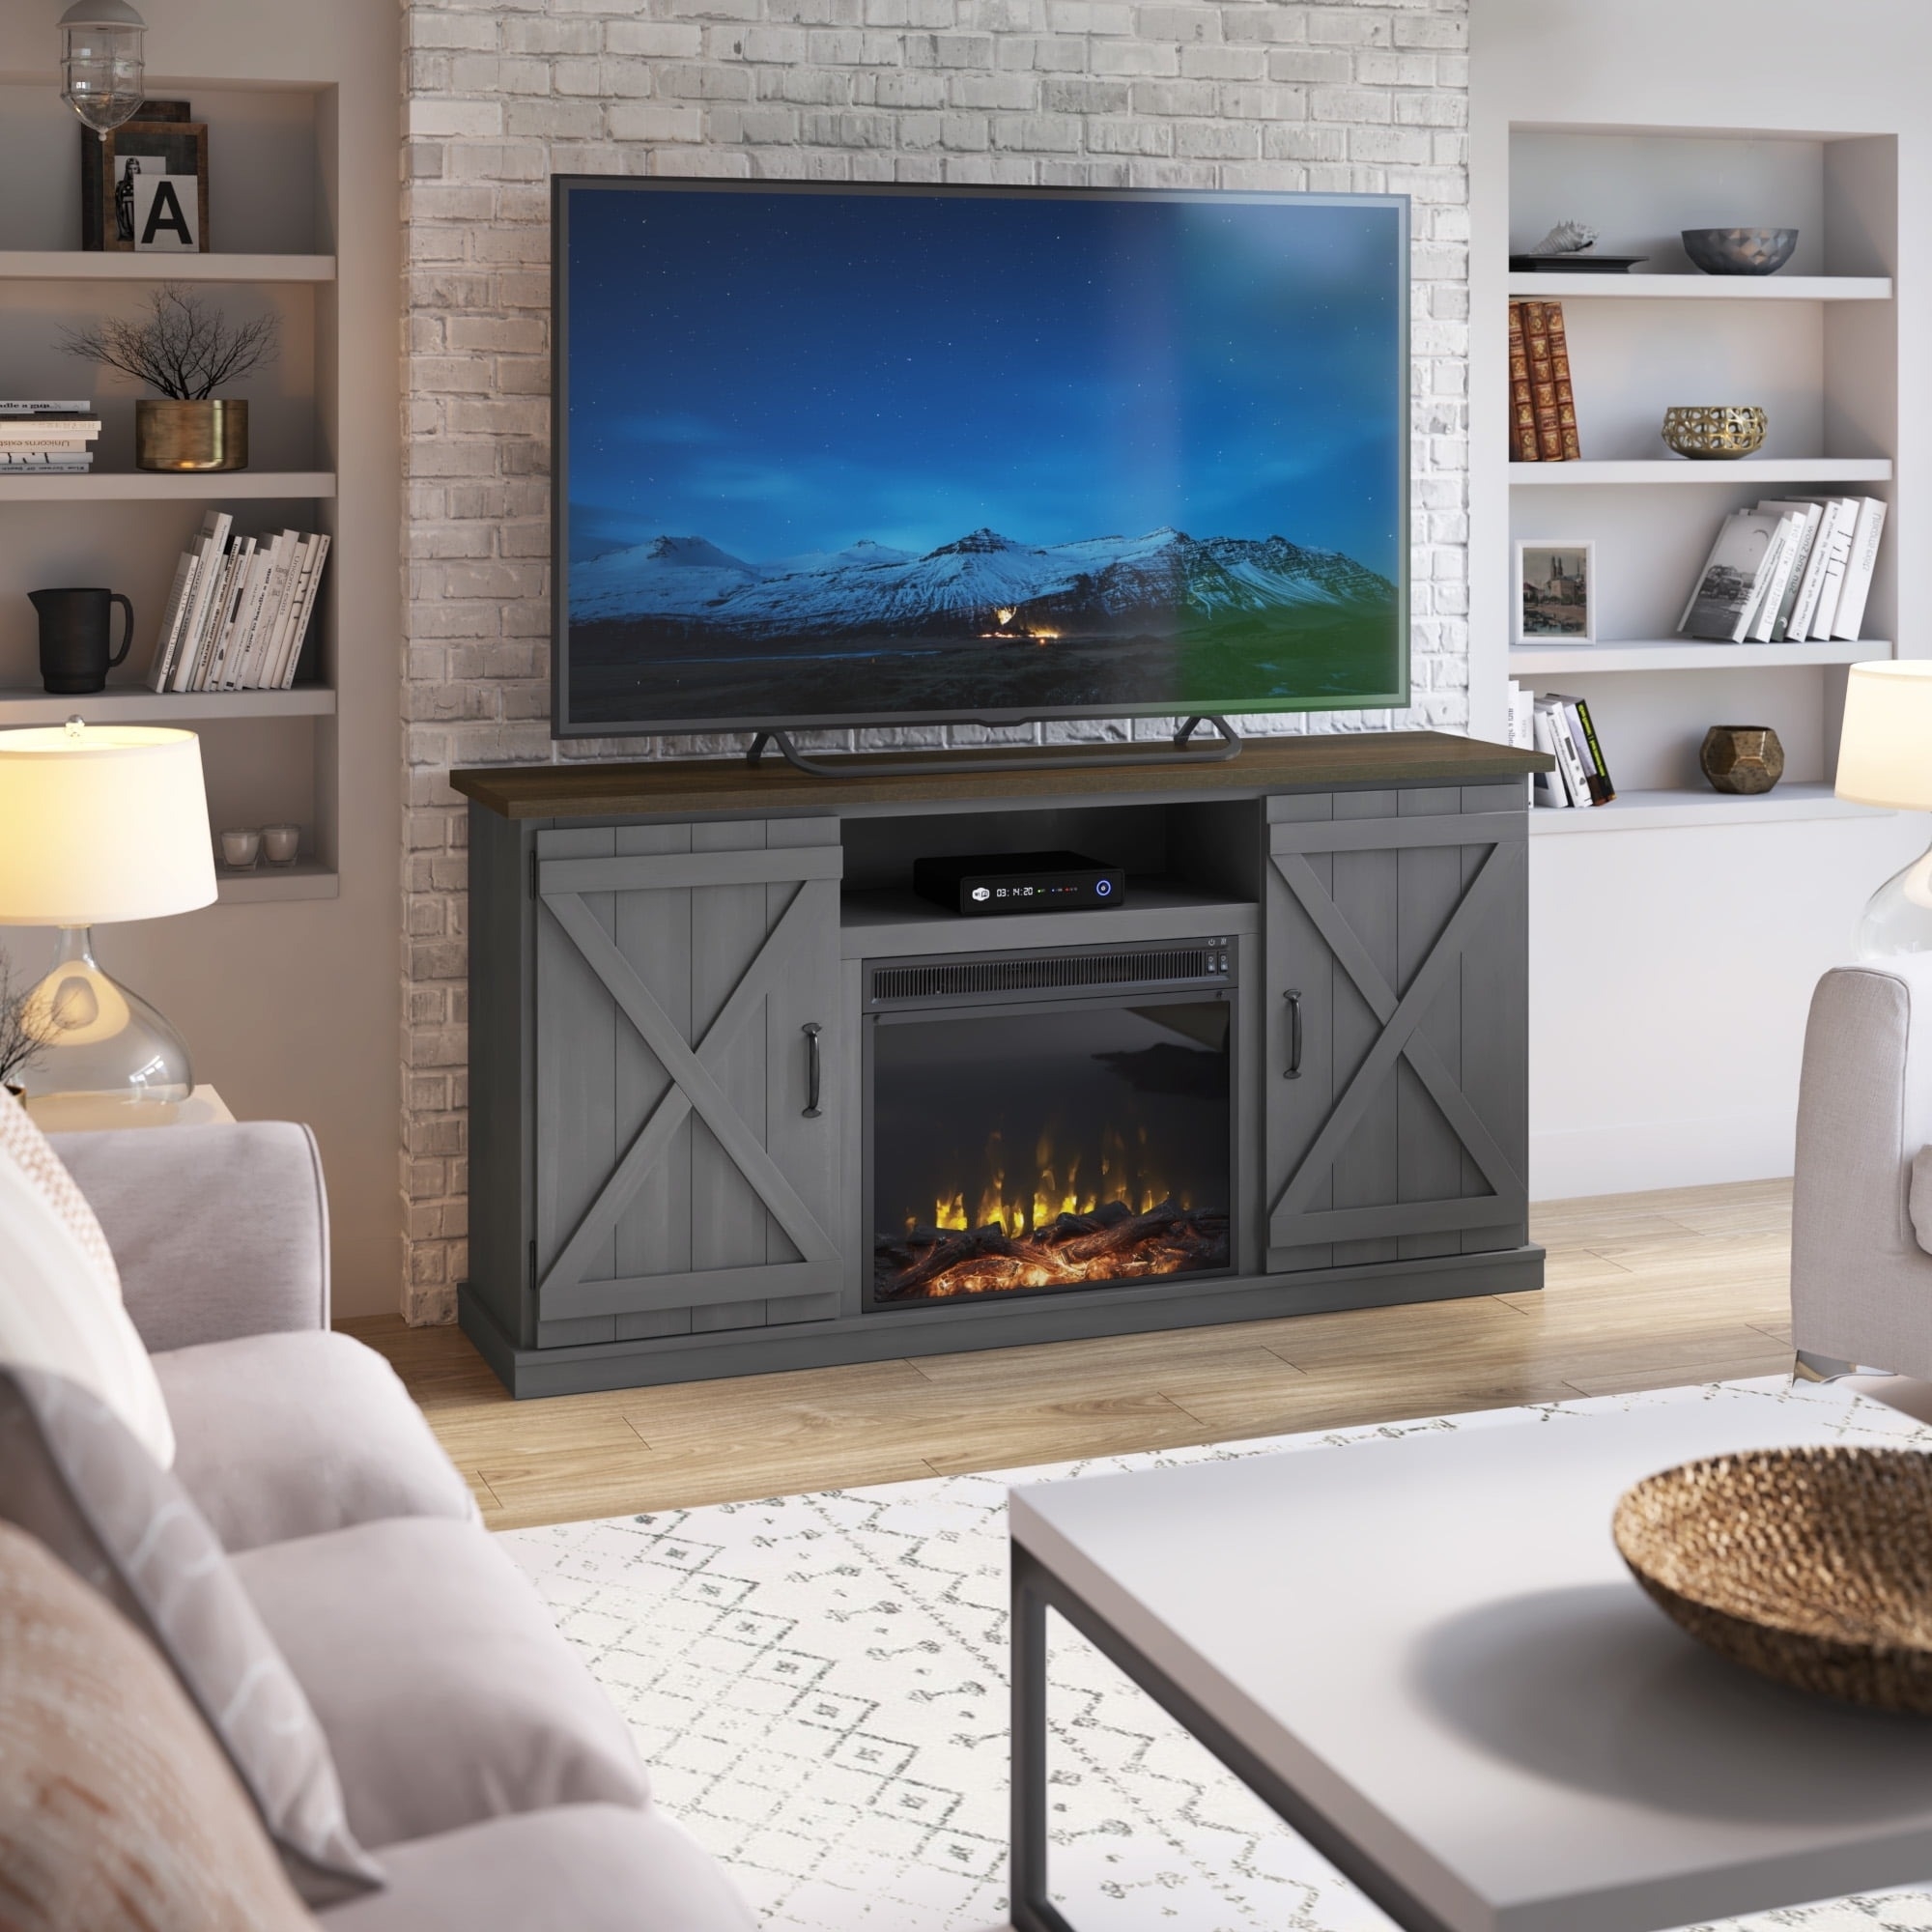 An electric fireplace console with a tv on top